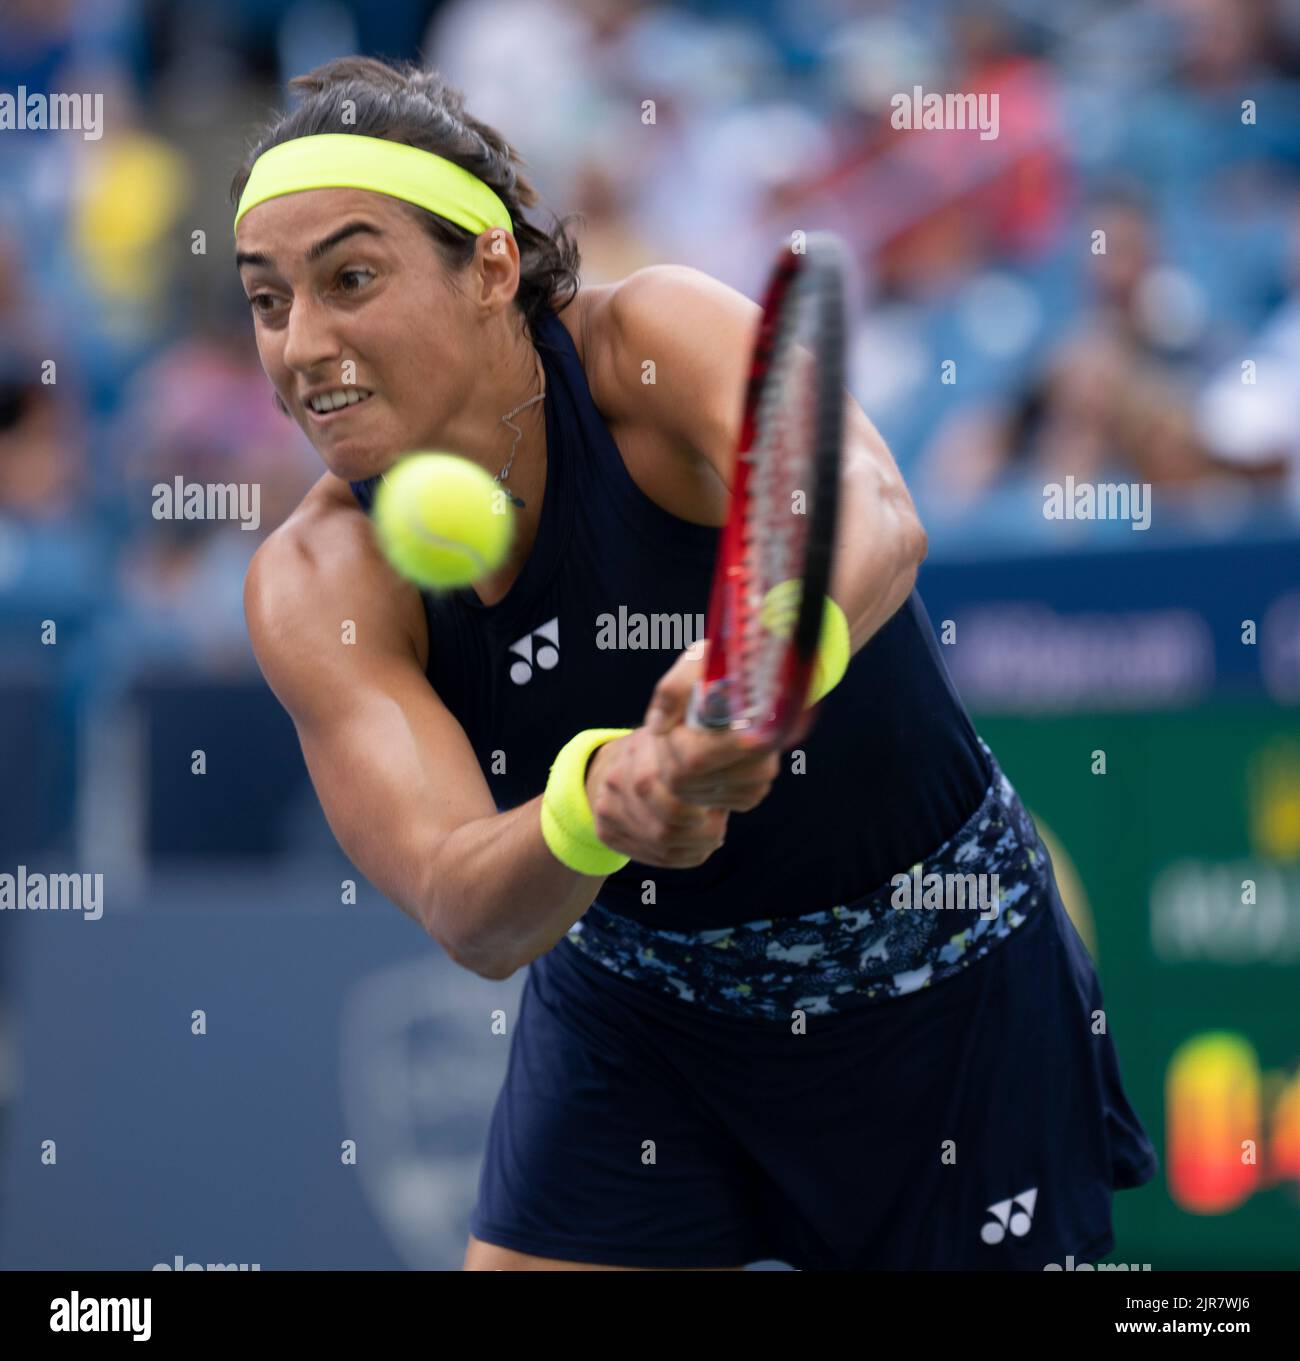 August 21, 2022: Caroline Garcia (FRA) defeated Petra Kvitova (CZE) 6-2, 6-4, at the final of the Western & Southern Open being played at Lindner Family Tennis Center in Cincinnati, Ohio/USA © Leslie Billman/Tennisclix/Cal Sport Media Stock Photo